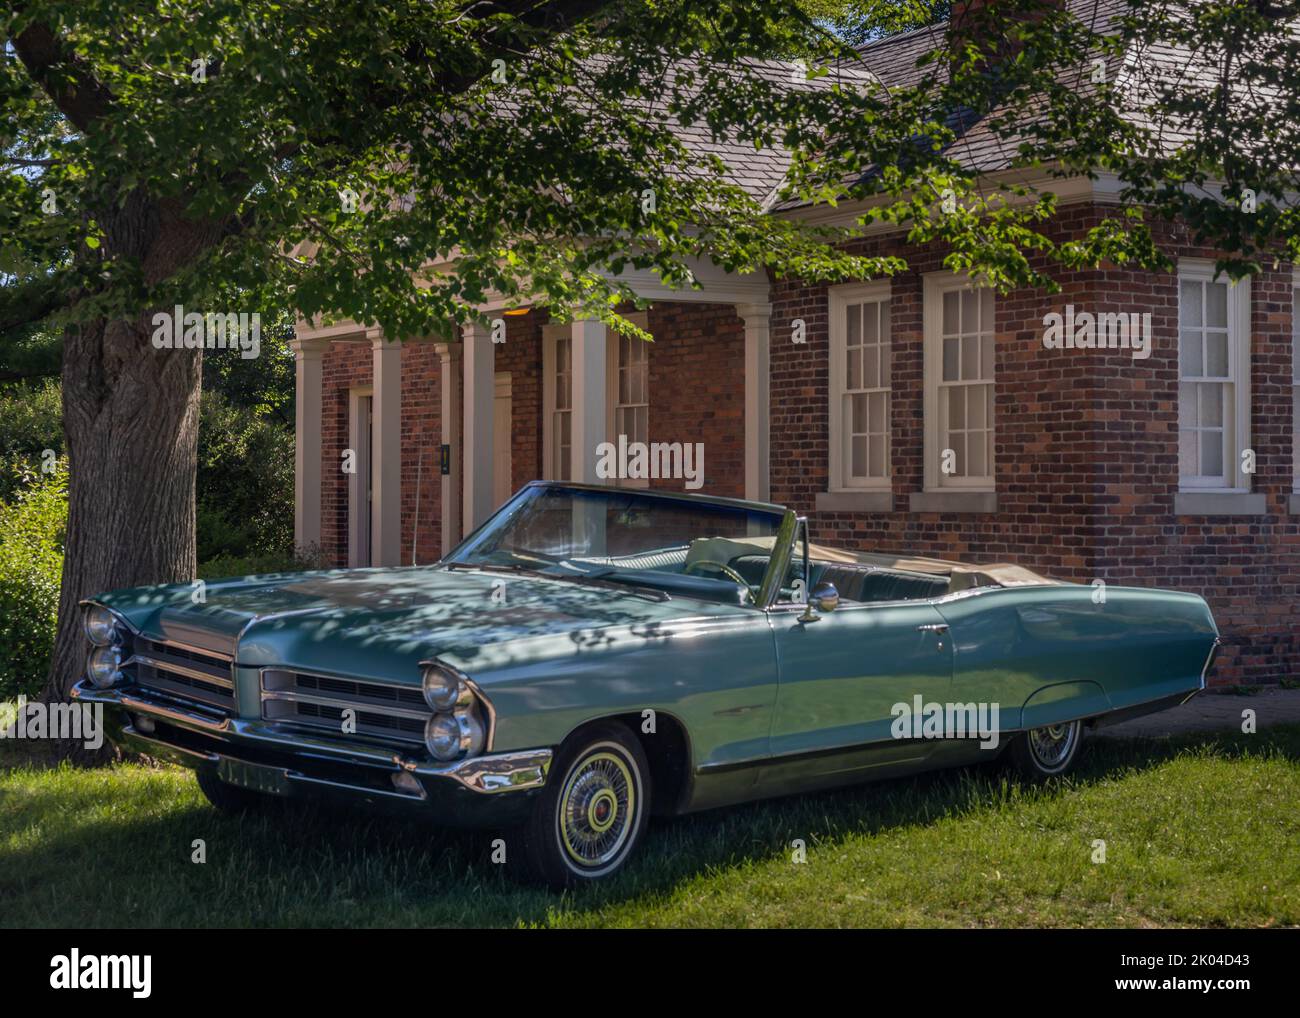 DEARBORN, MI/USA - JUNE 18, 2022: A 1965 Pontiac Bonneville car at the Henry Ford (THF) Motor Muster car show, Greenfield Village, near Detroit. Stock Photo